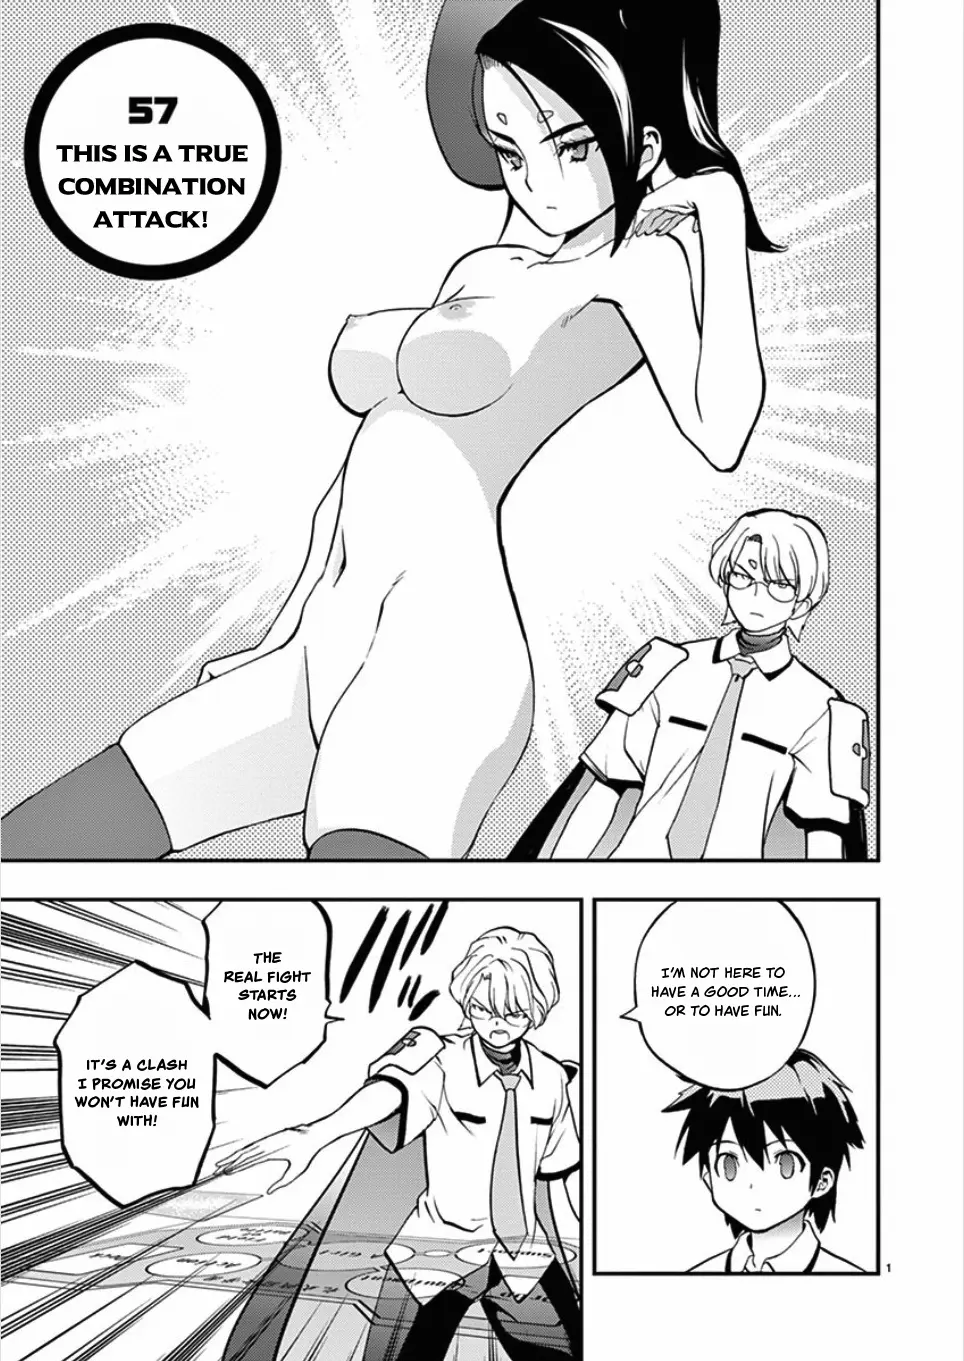 Card Girl! Maiden Summoning Undressing Wars - 57 page 1-0bc54a1a